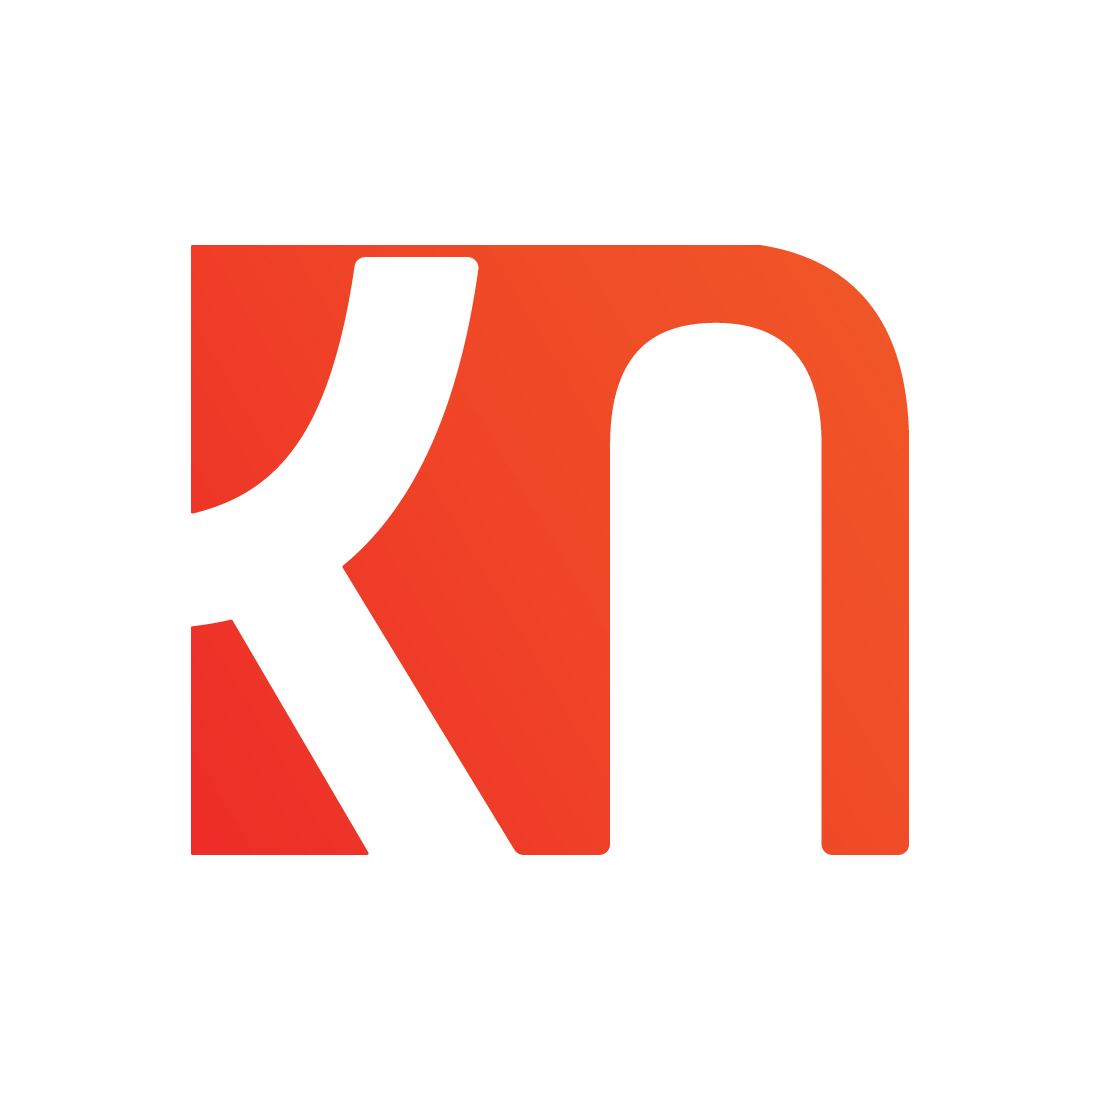 Professional KN letters logo design vector image KN logo white and orange color NK icon brand company identity preview image.